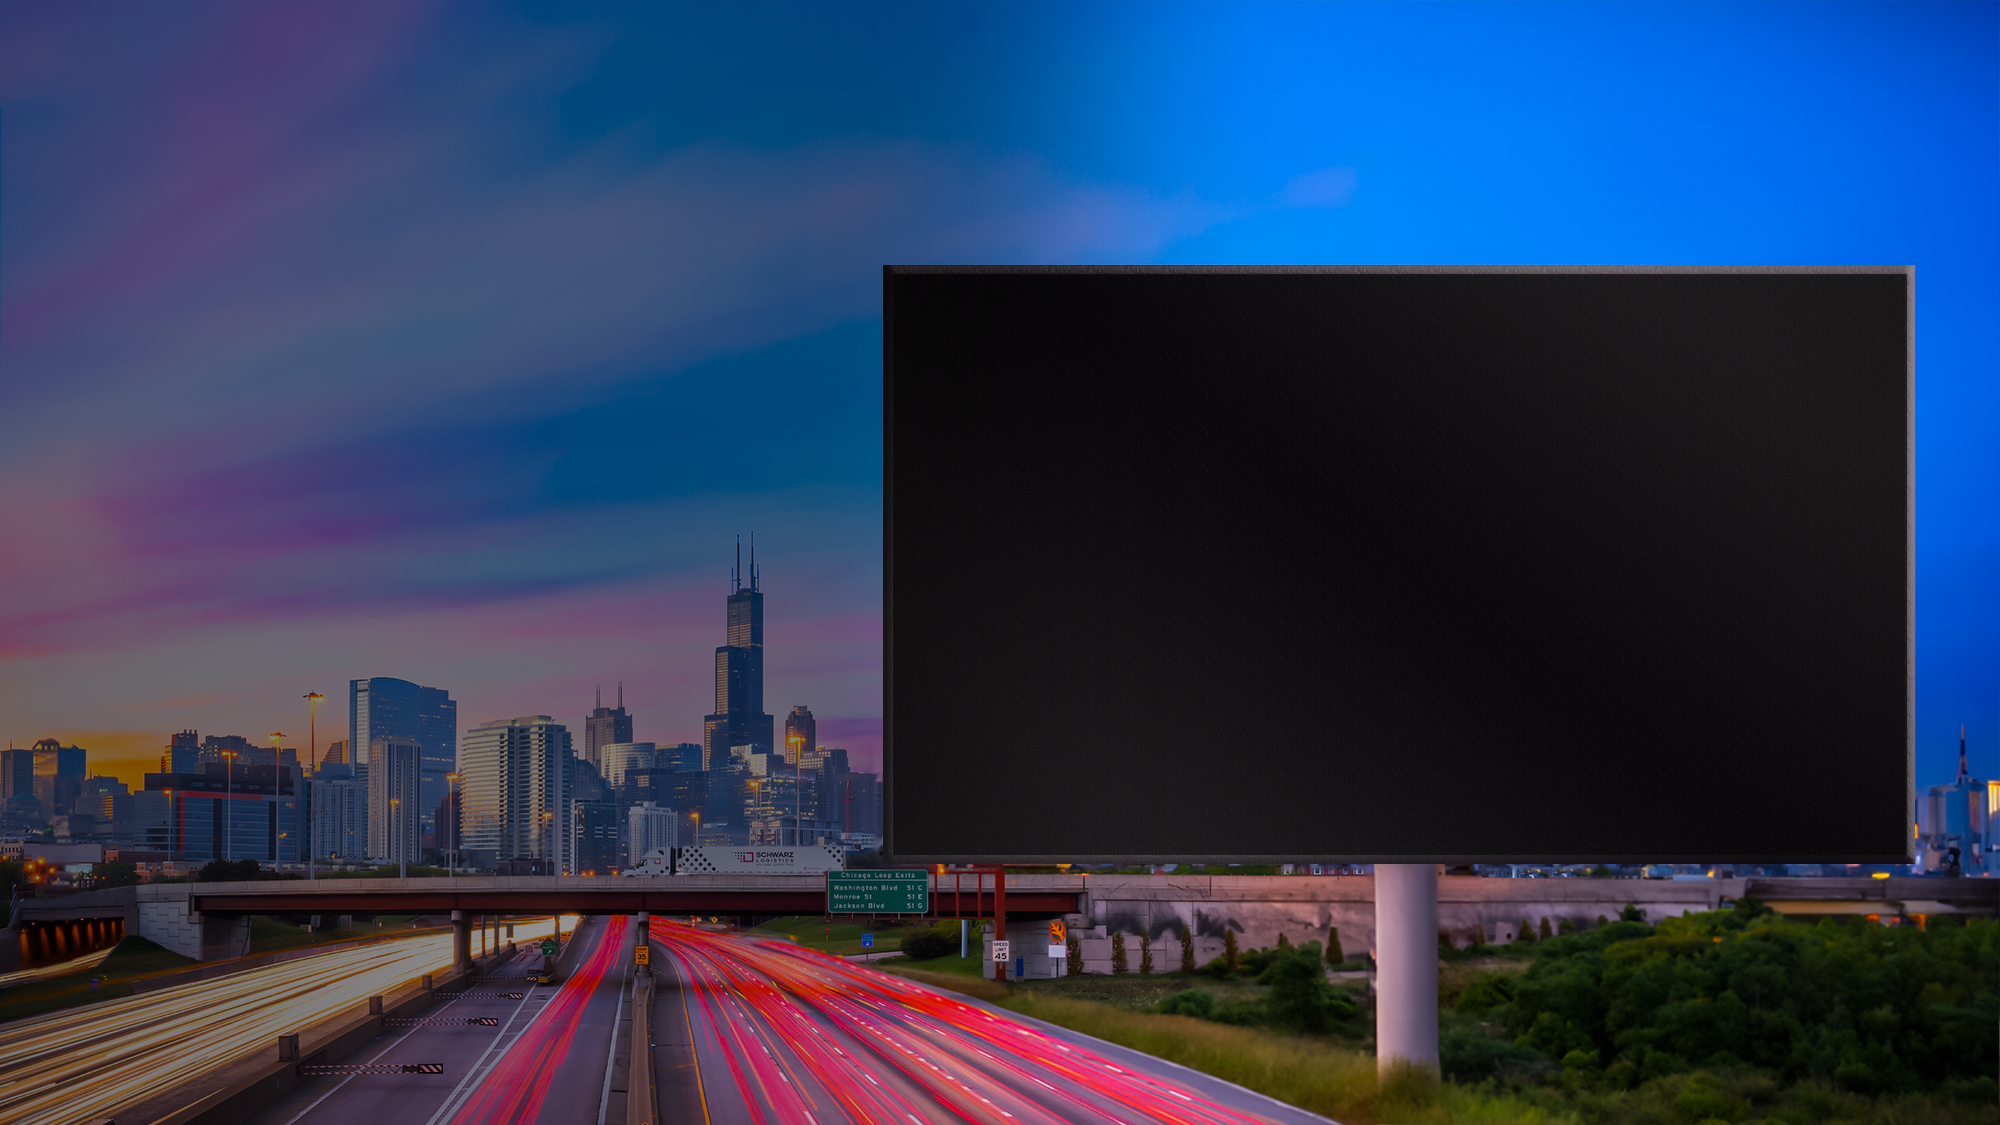 A vivid sunset sky with streaks of pink and blue above the Chicago skyline, viewed over a bustling highway with streaks of light from moving traffic. A large billboard stands prominently in the foreground, ready for advertising, with the city's architecture creating a dramatic backdrop.